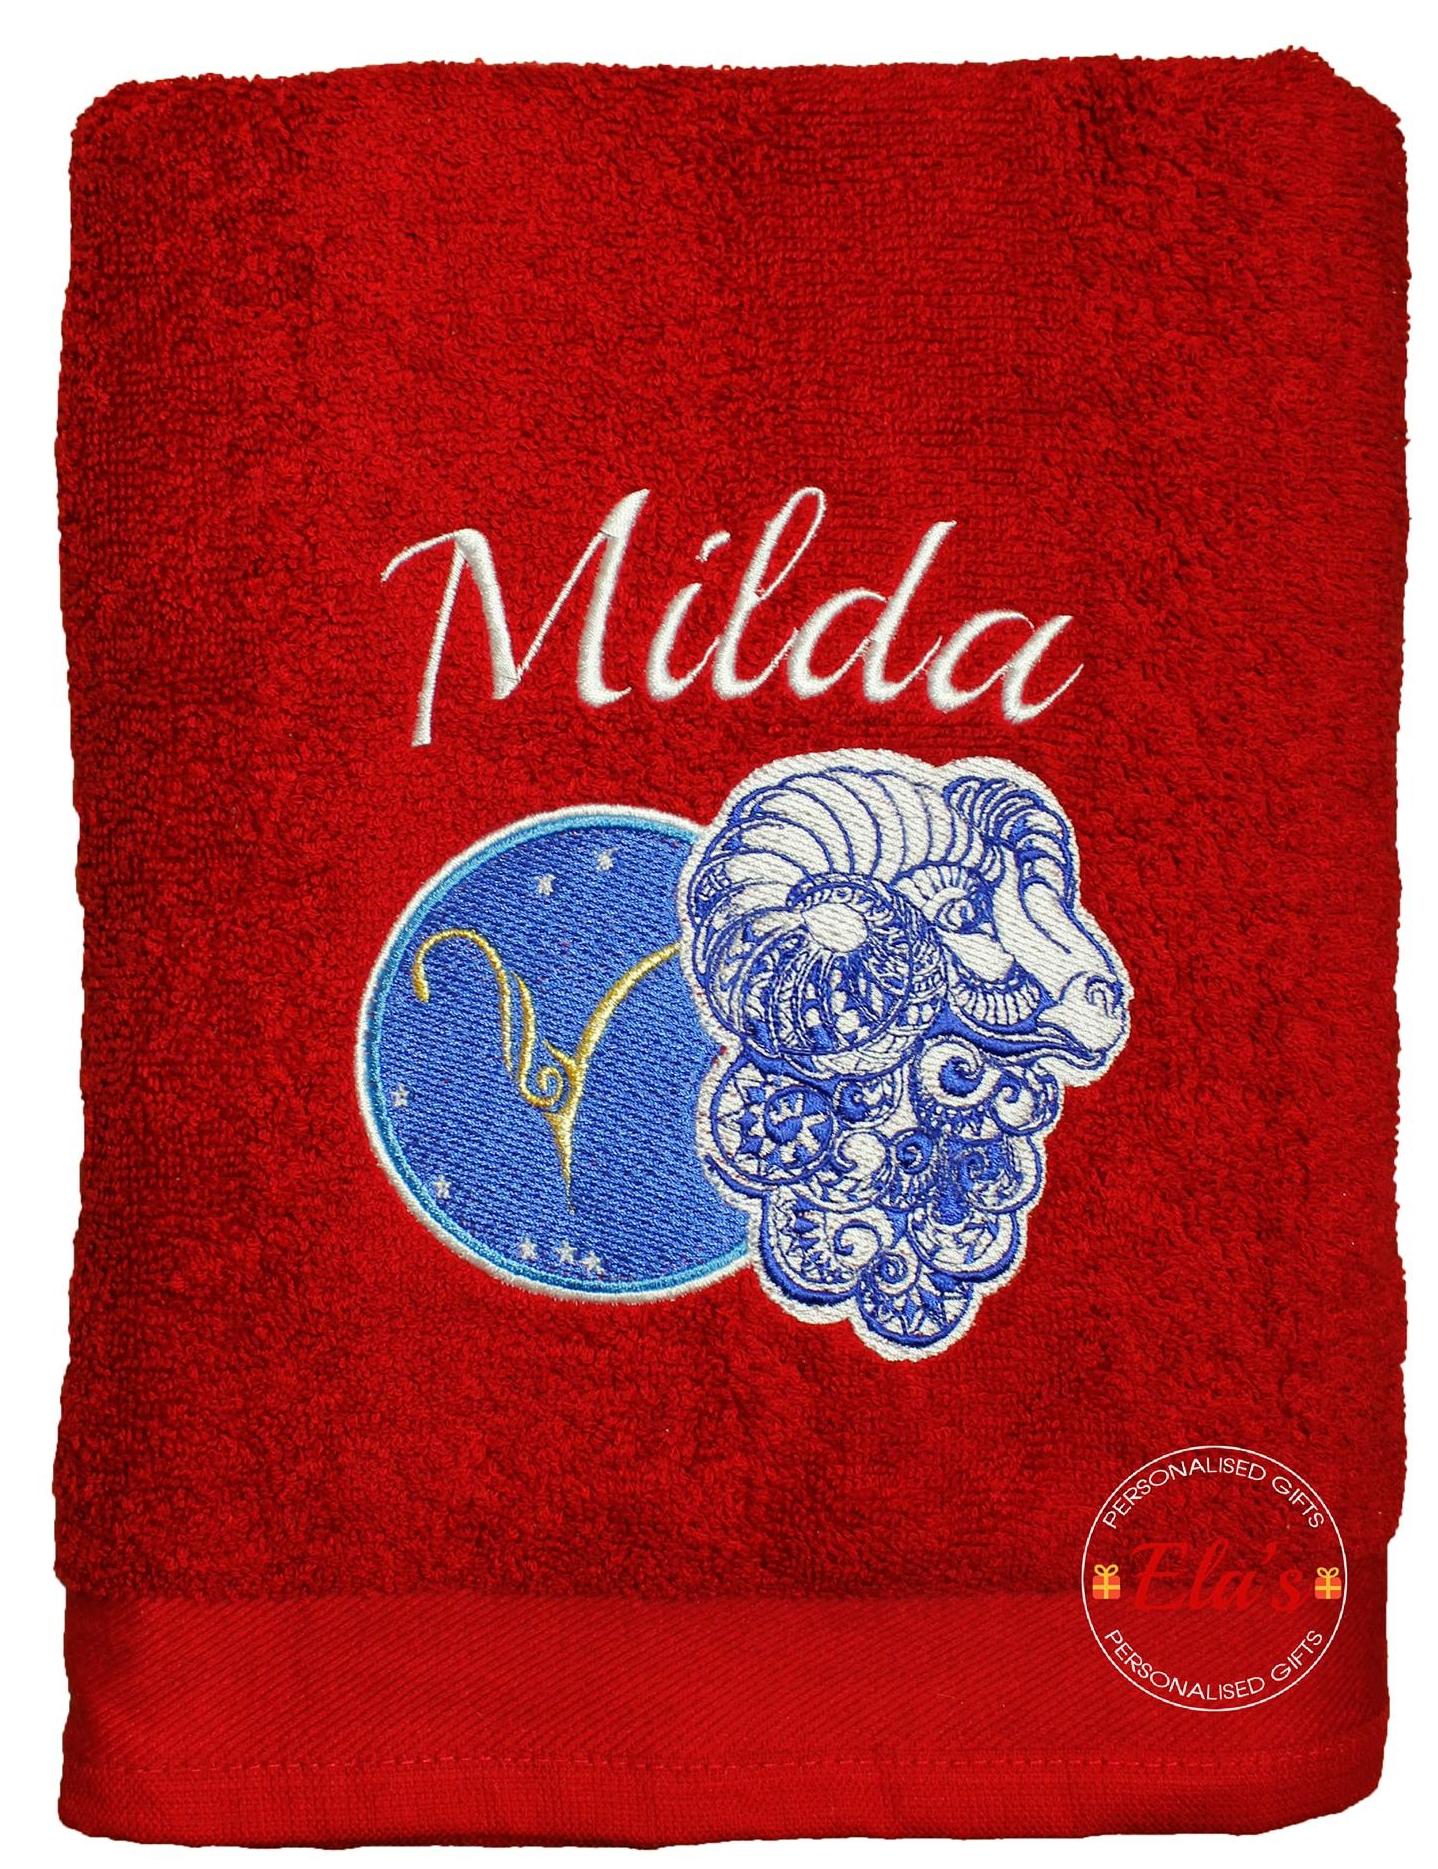 Embroidered towel with Aries zodiac sign design